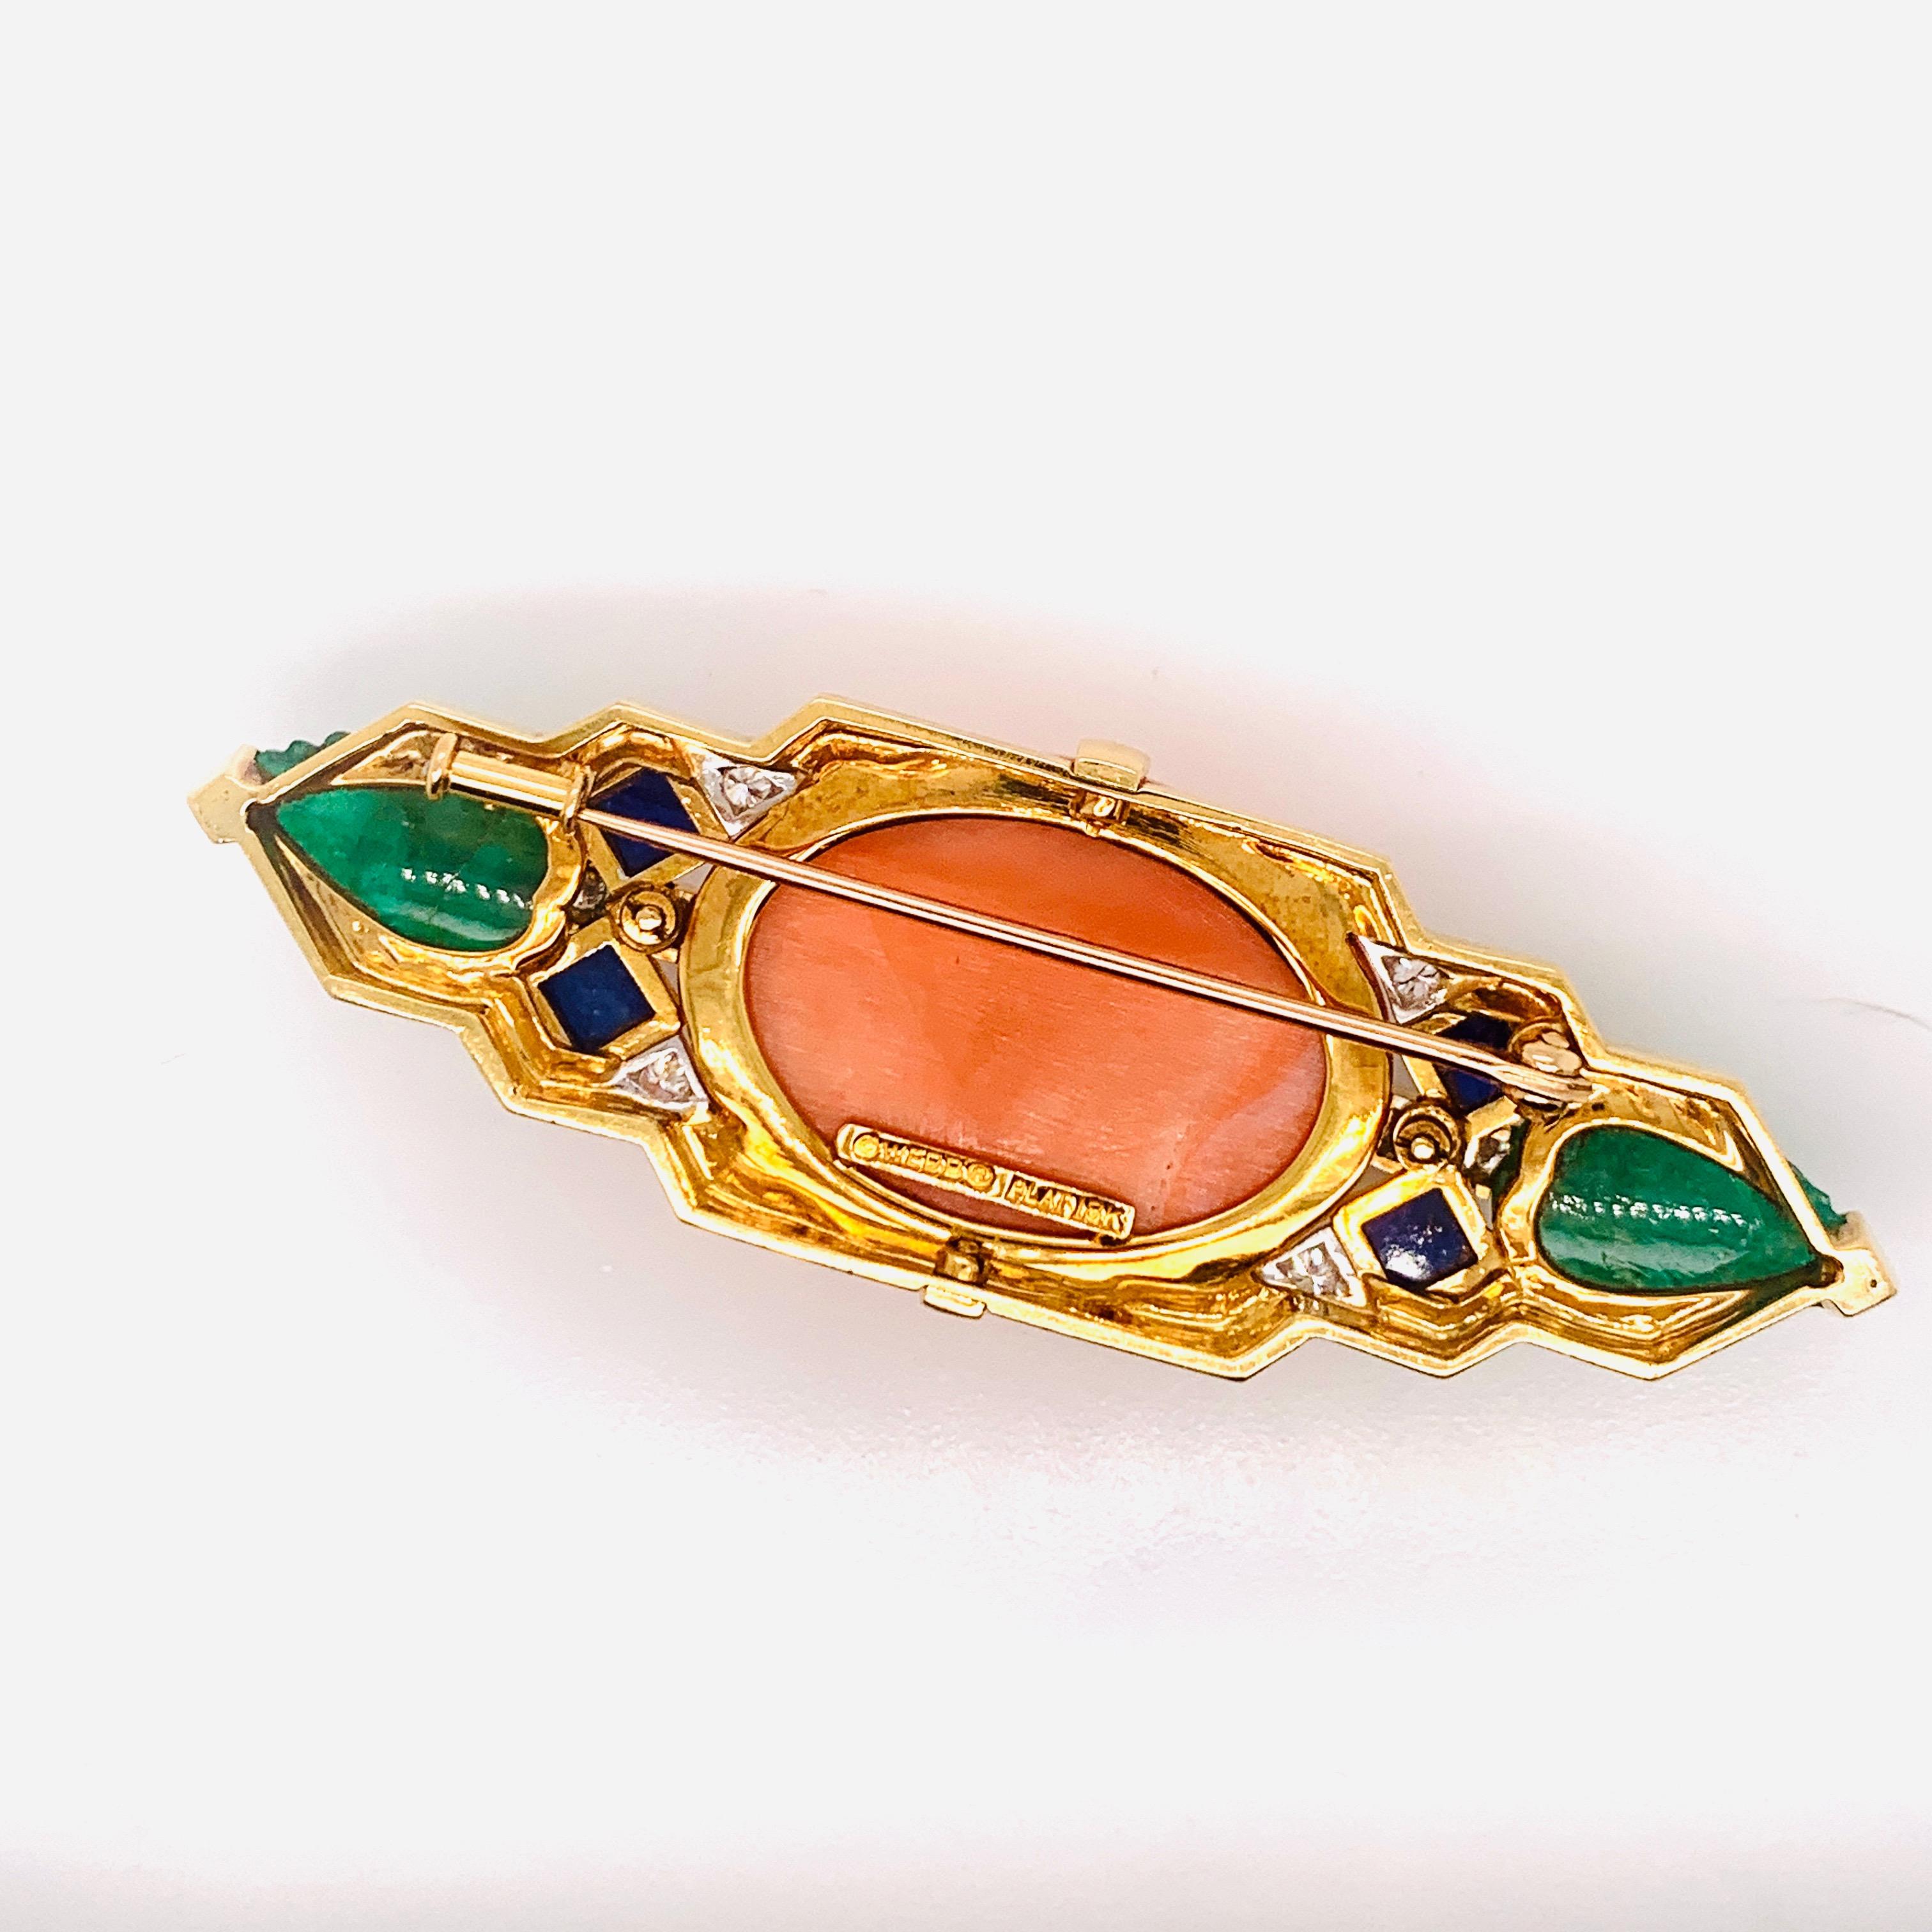 This estate David Webb brooch is the perfect addition to any jewelry collection. The main stone on this brooch is a vibrant oval shaped coral, surrounded by four square cut lapis lazuli, ten round cut diamonds, and two emeralds. All of these